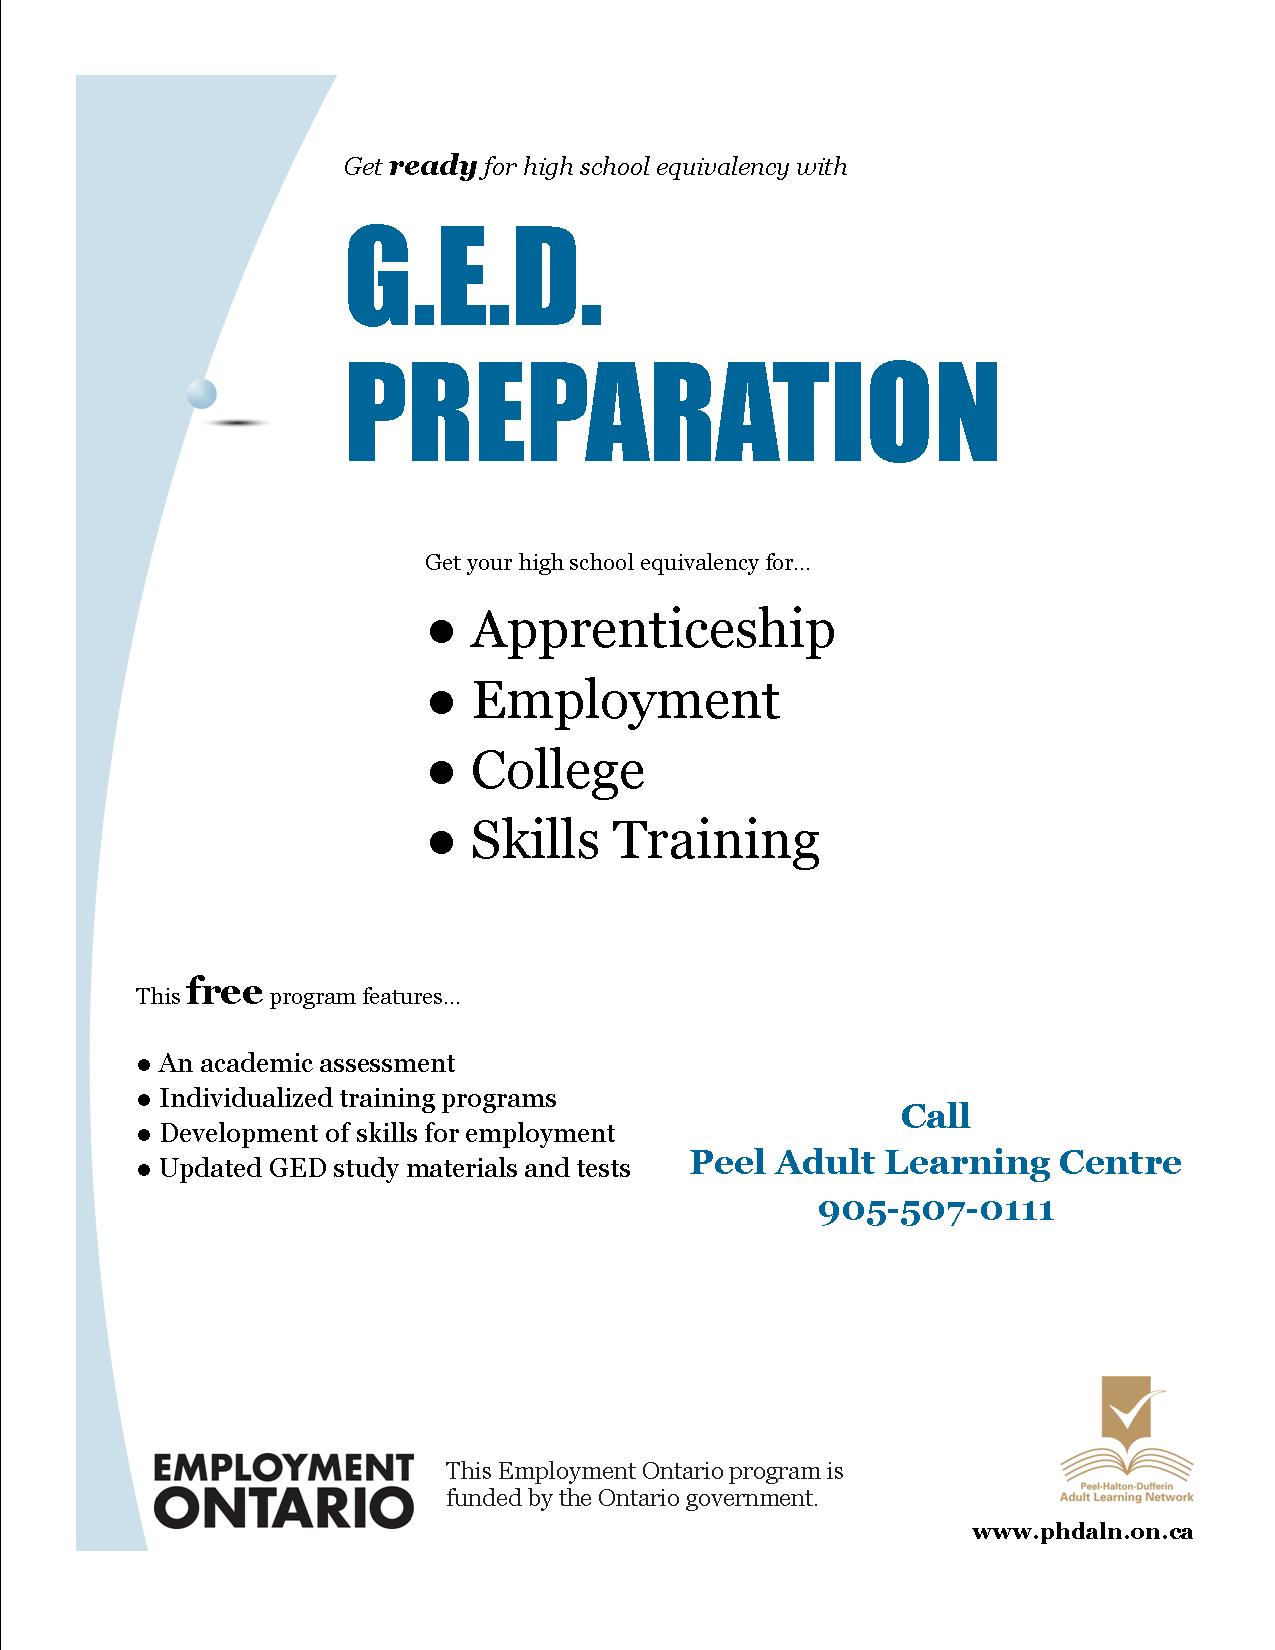 Peel Adult Learning Centre flyer